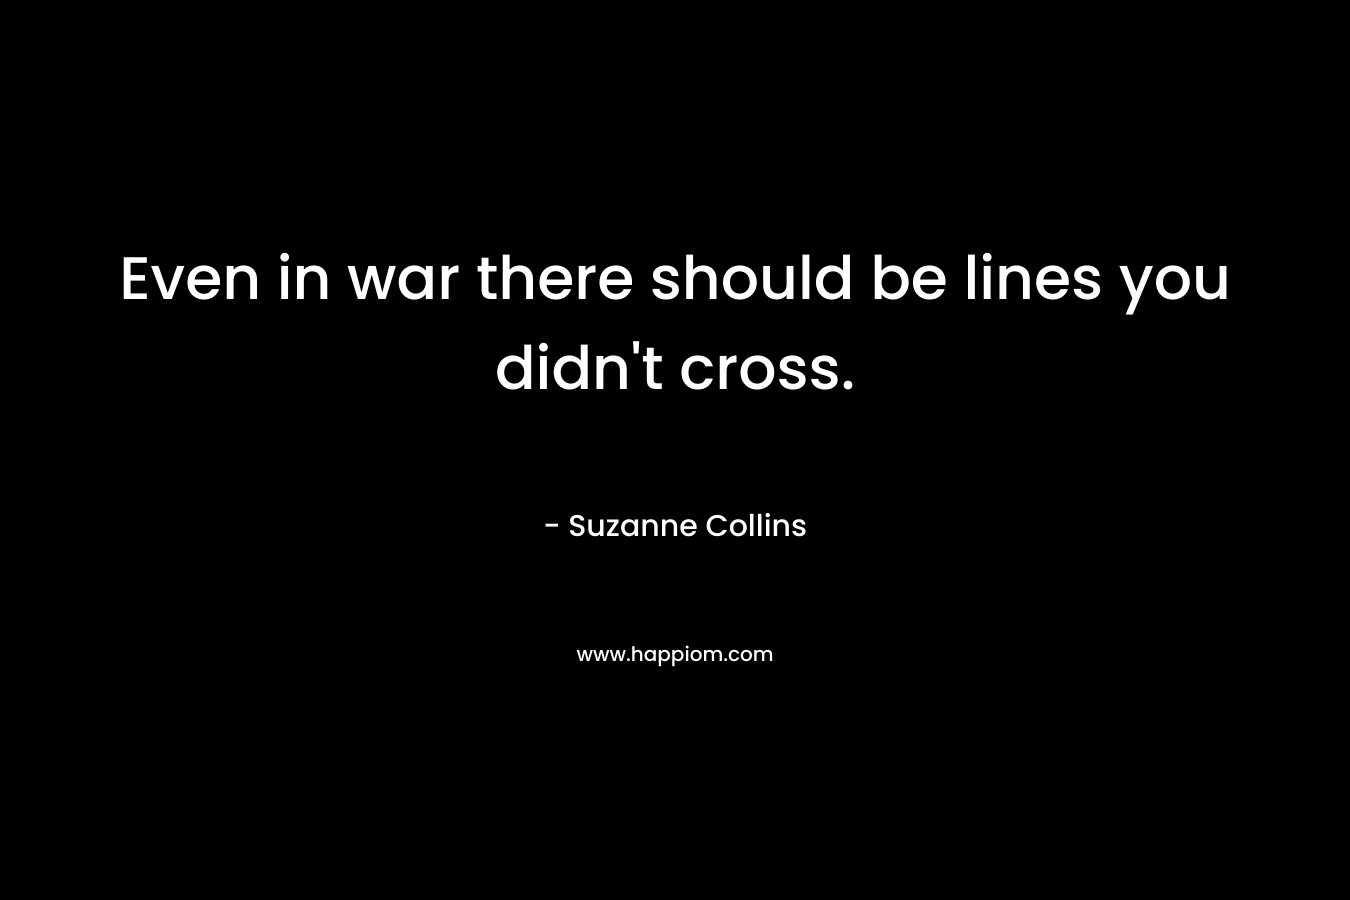 Even in war there should be lines you didn't cross.